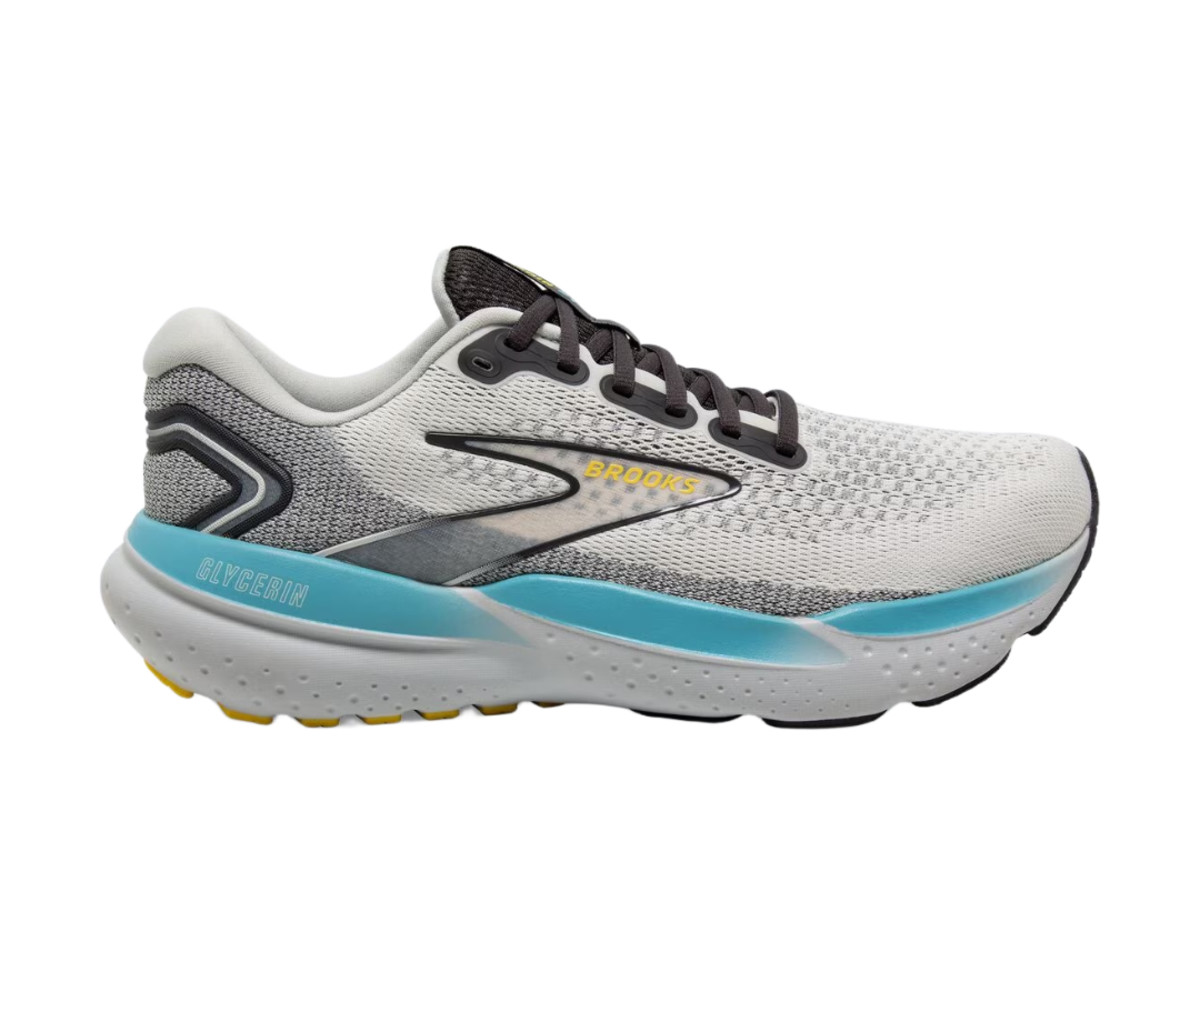 Brooks Running - and IT HAS POCKETS! That's right! The new